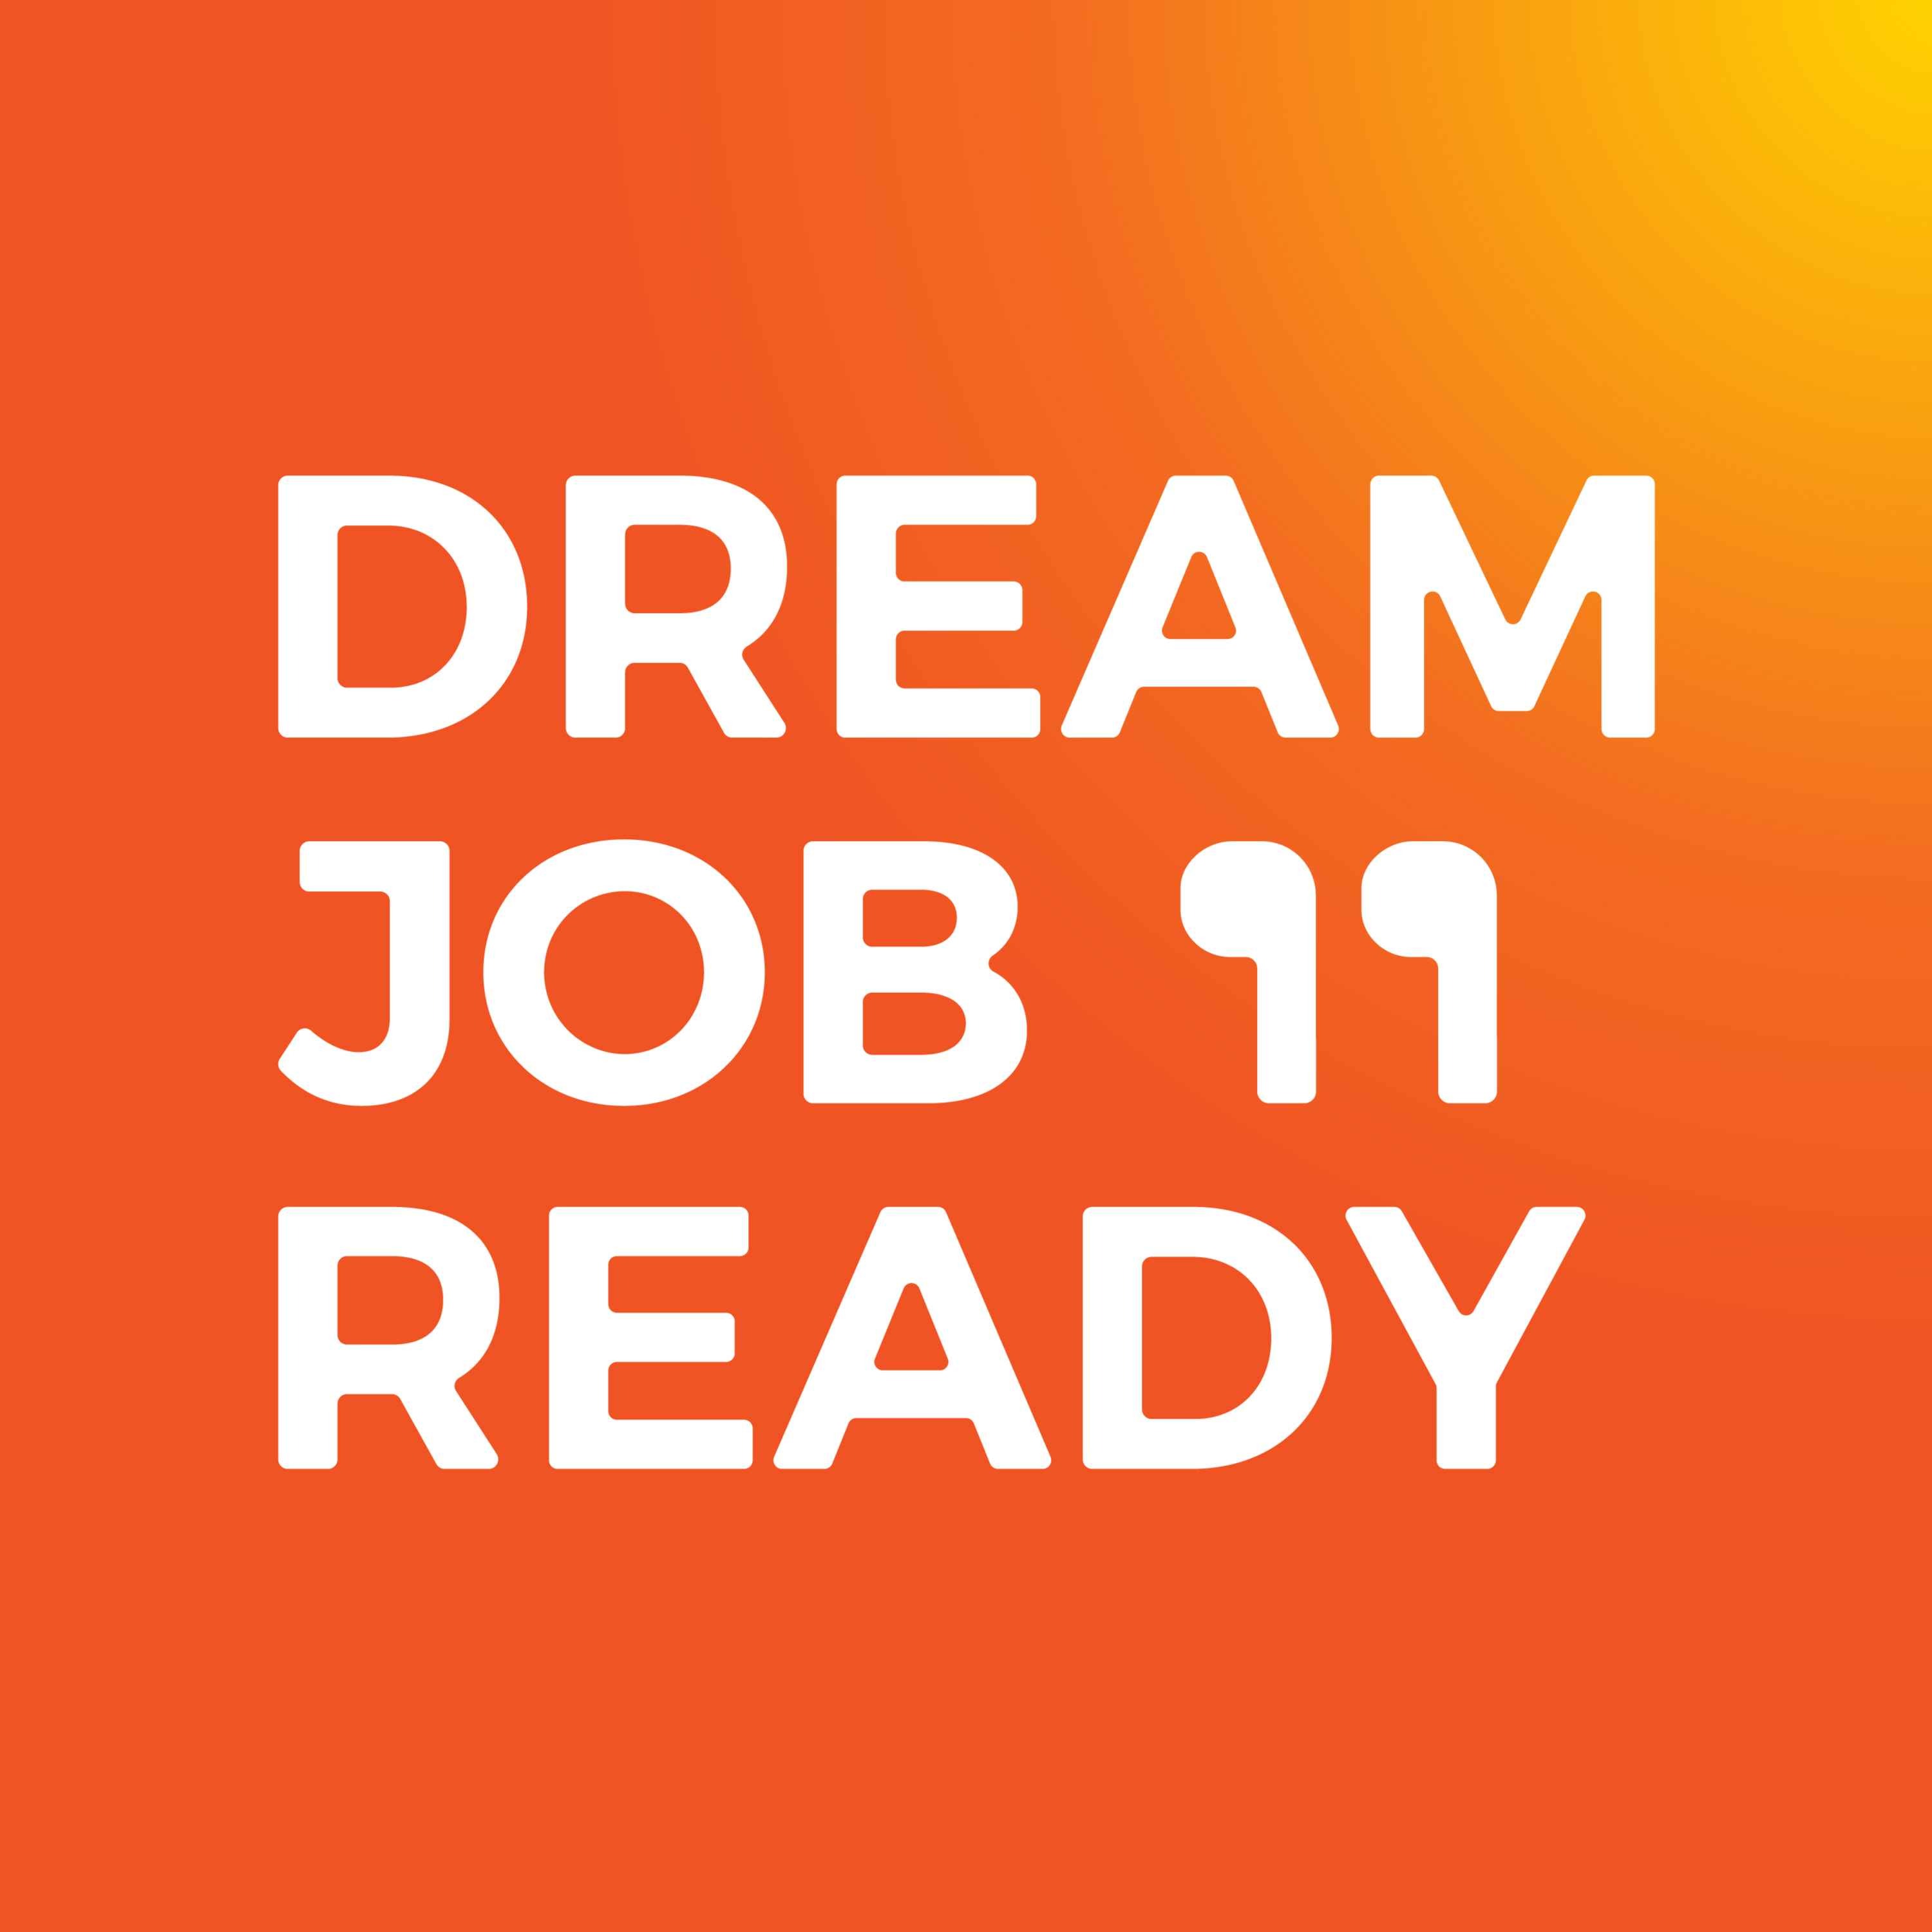 Movember's Marketing Director, Jason Olive and Dane Sharp discuss what it's like to work for a non-profit organisation and charity. | Dream Job Ready EP43